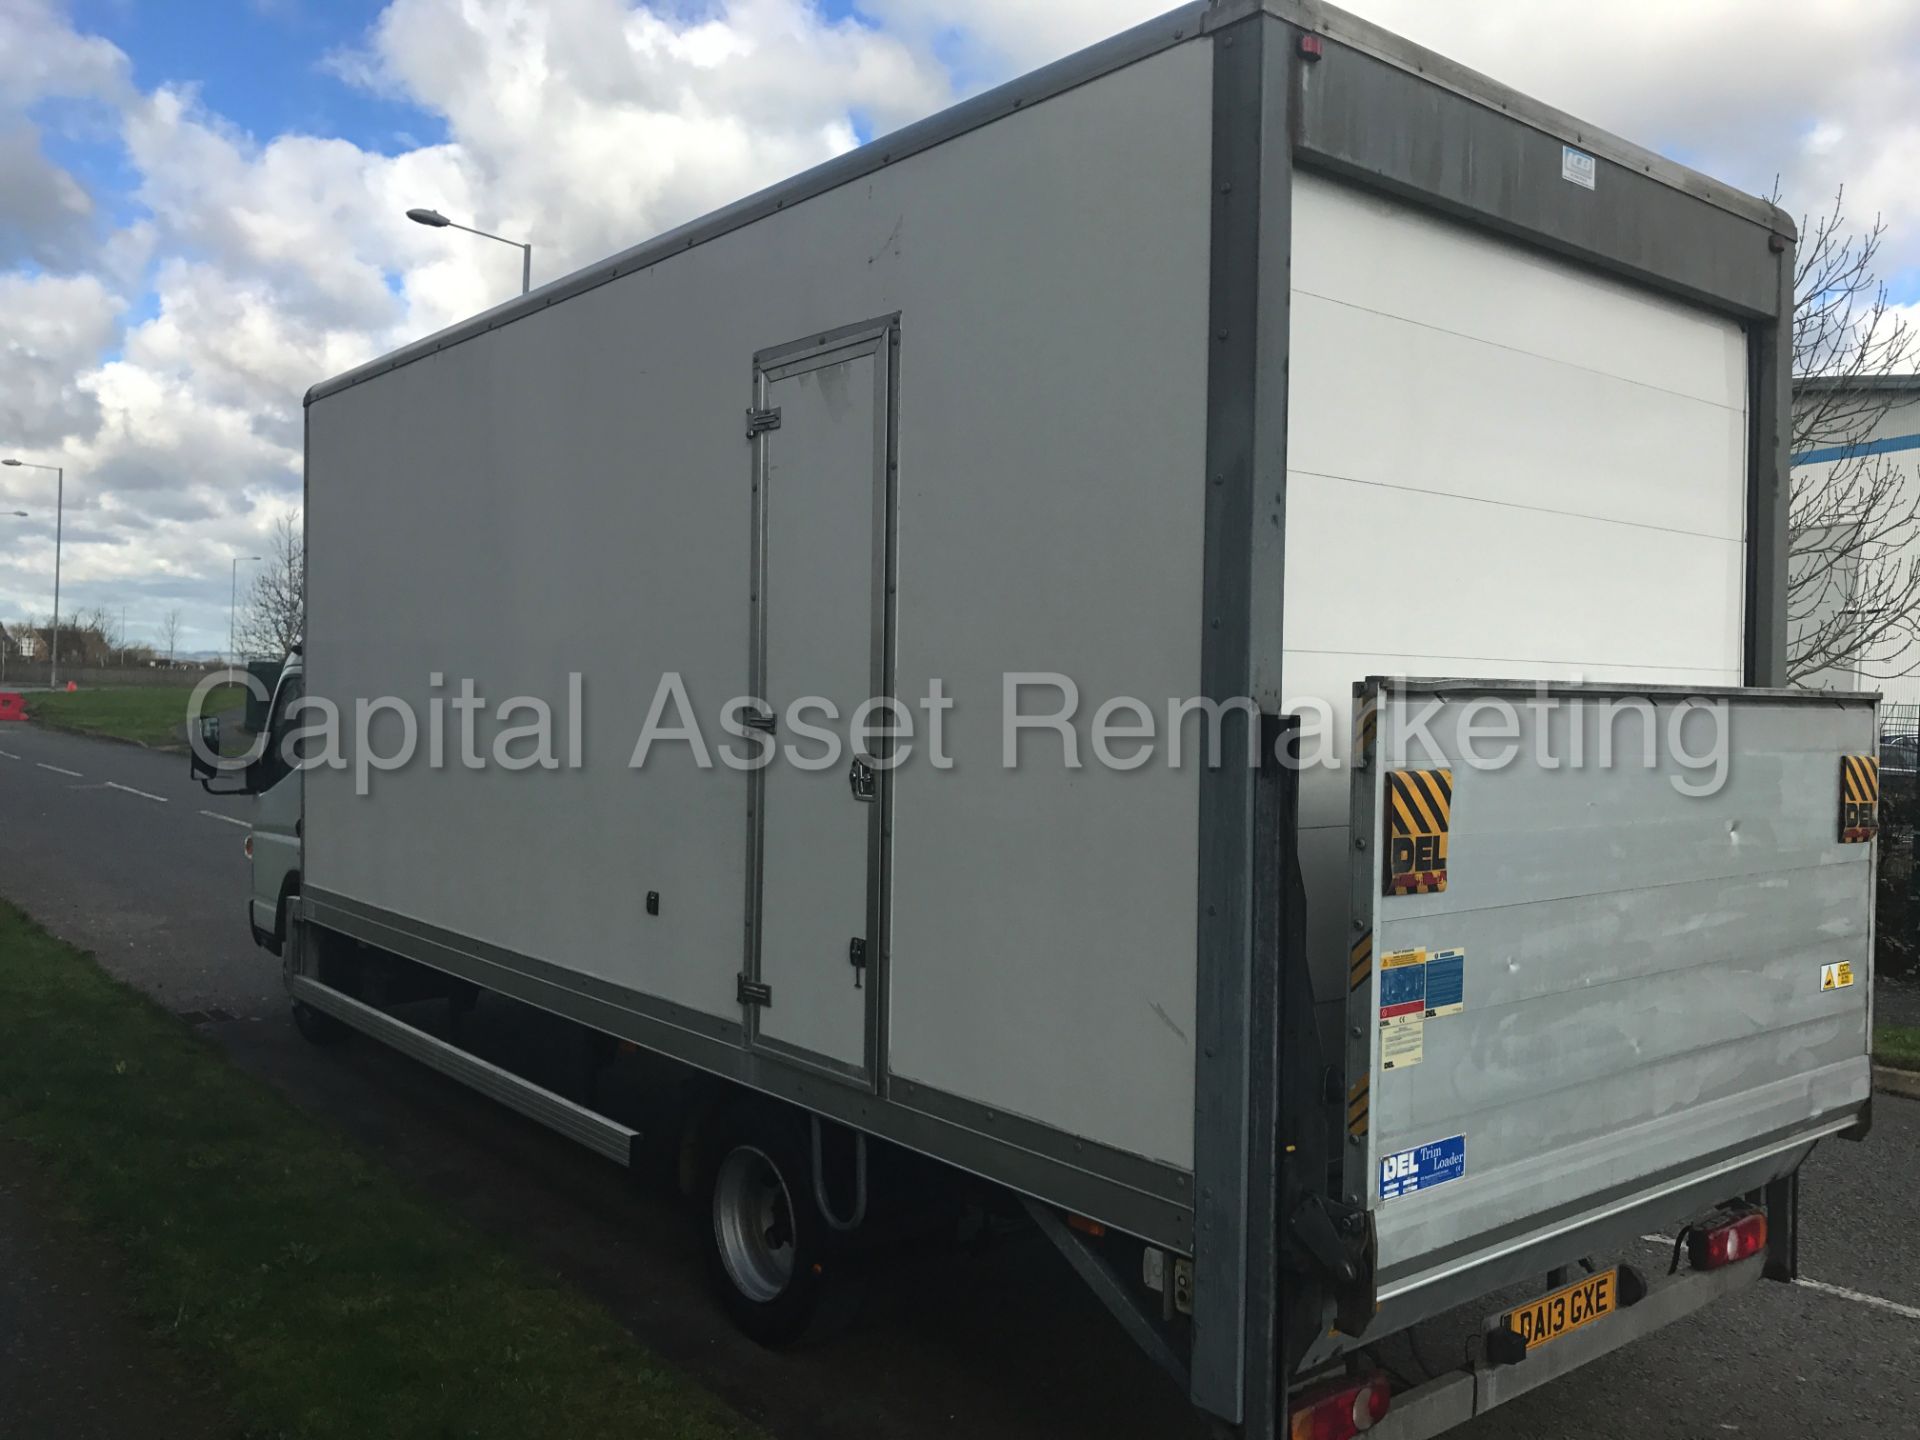 MITSUBISHI FUSO CANTER 7C15 - 7500KG GROSS - 13 REG - 1 OWNER - LOW MILES - TAIL LIFT - NEW SHAPE!!! - Image 4 of 14